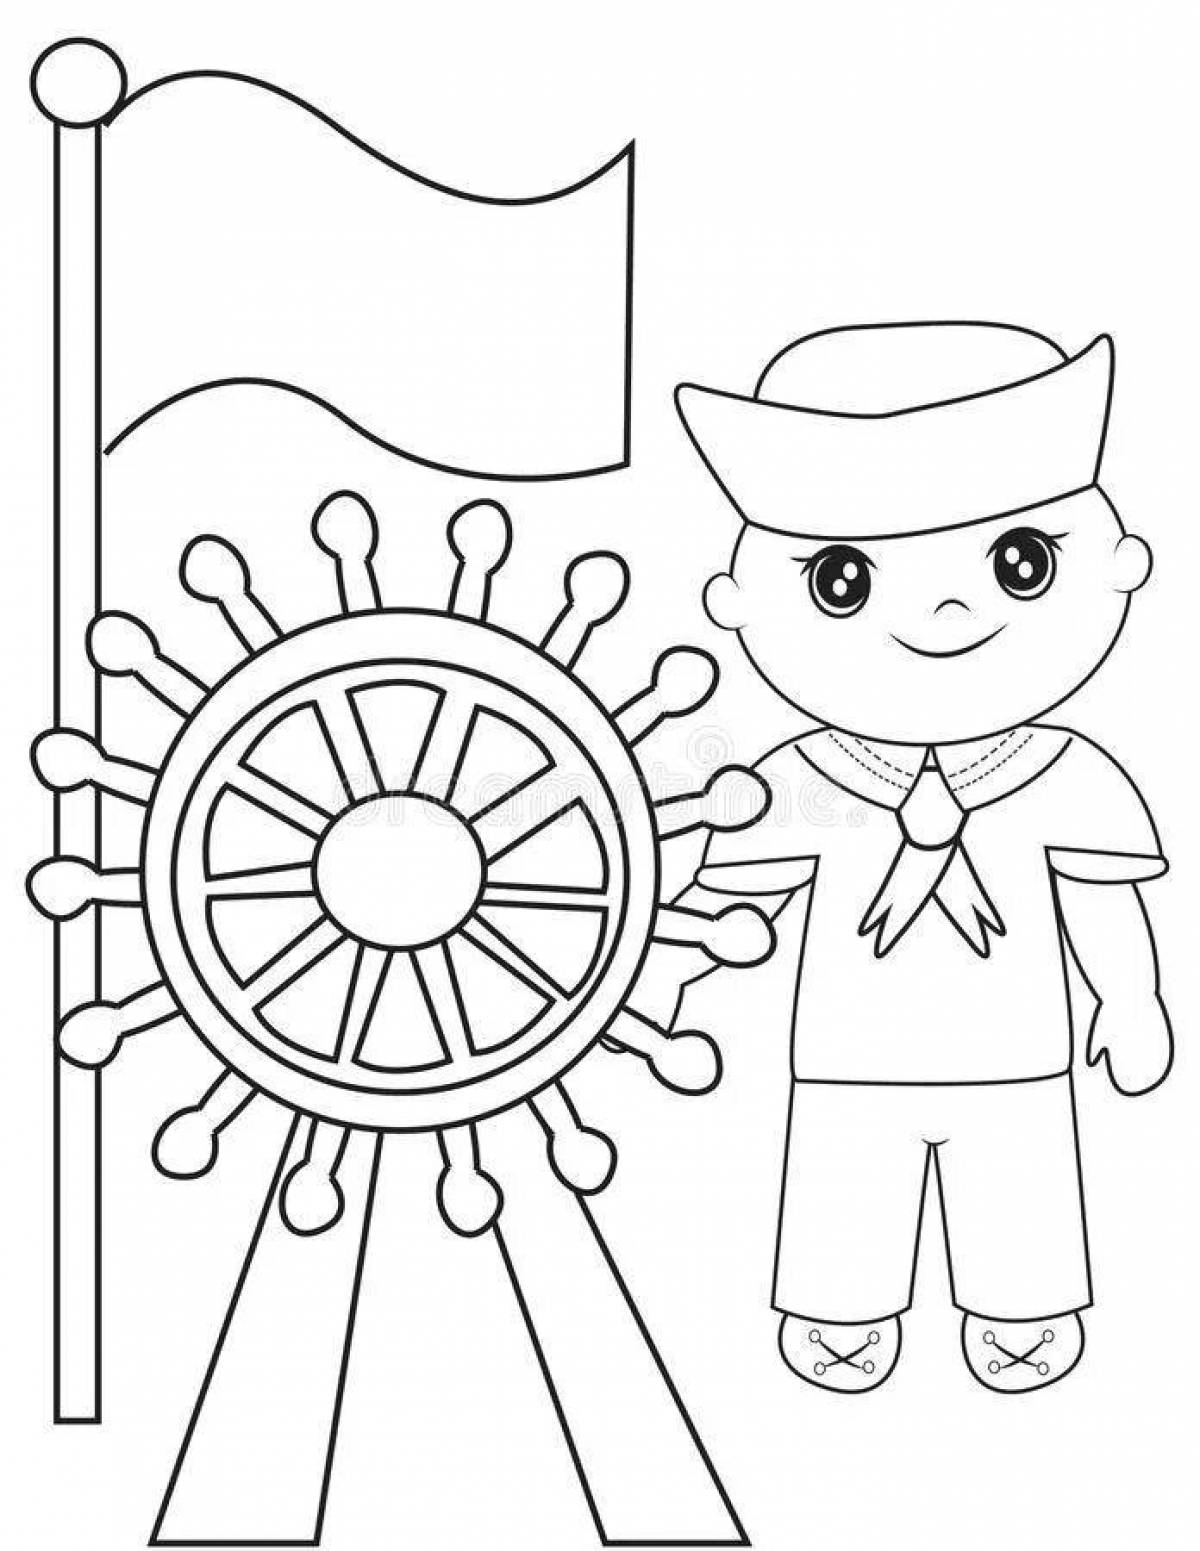 Animated sailor coloring book